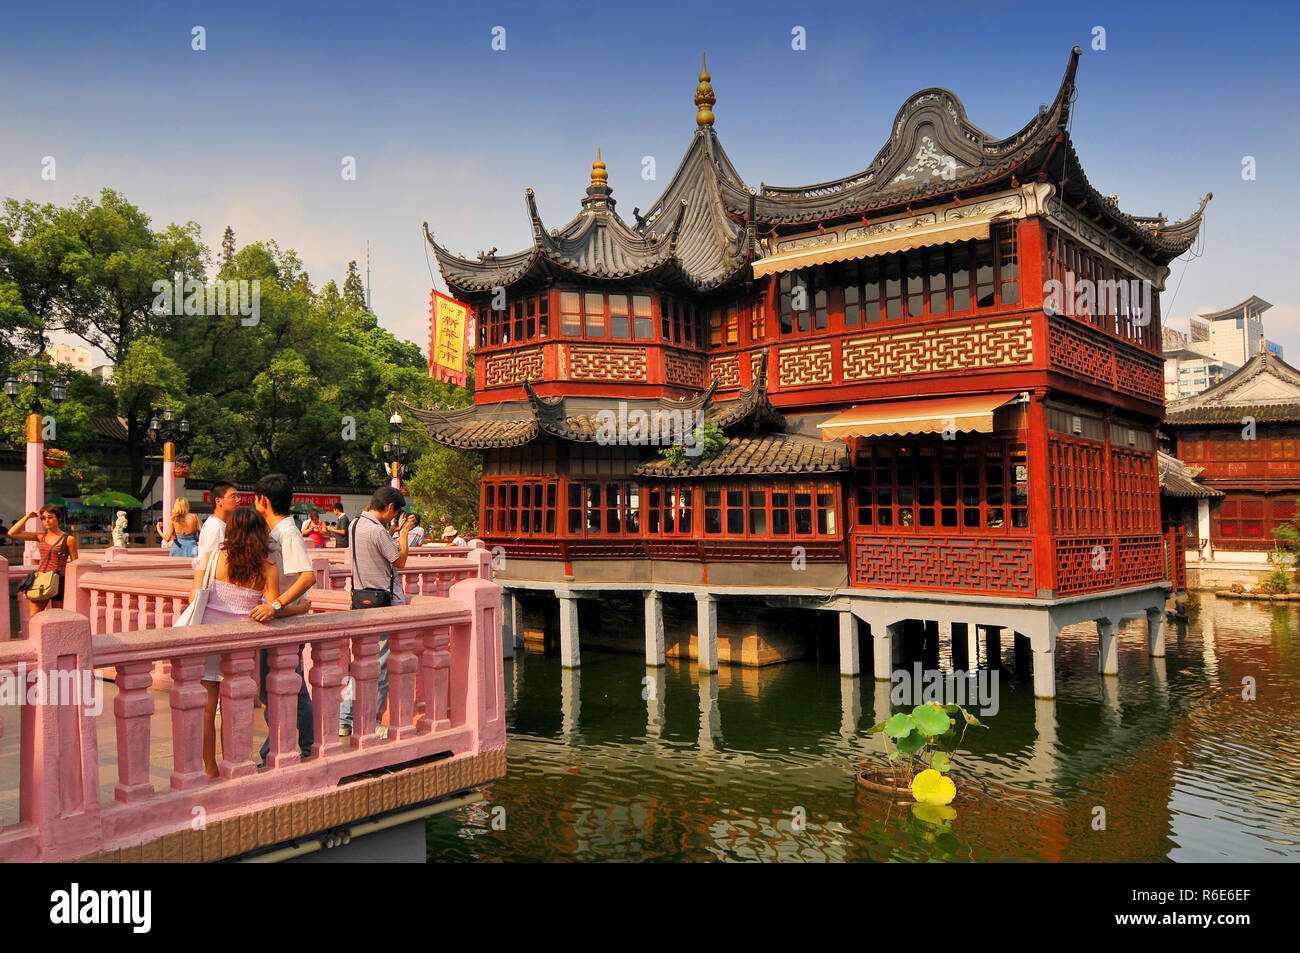 Traditional Pavilion In Yu Garden Or Yuyuan Garden An Extensive Chinese Garden Located Beside The City God Temple In The Northeast Of The Old City Of Stock Photo Alamy